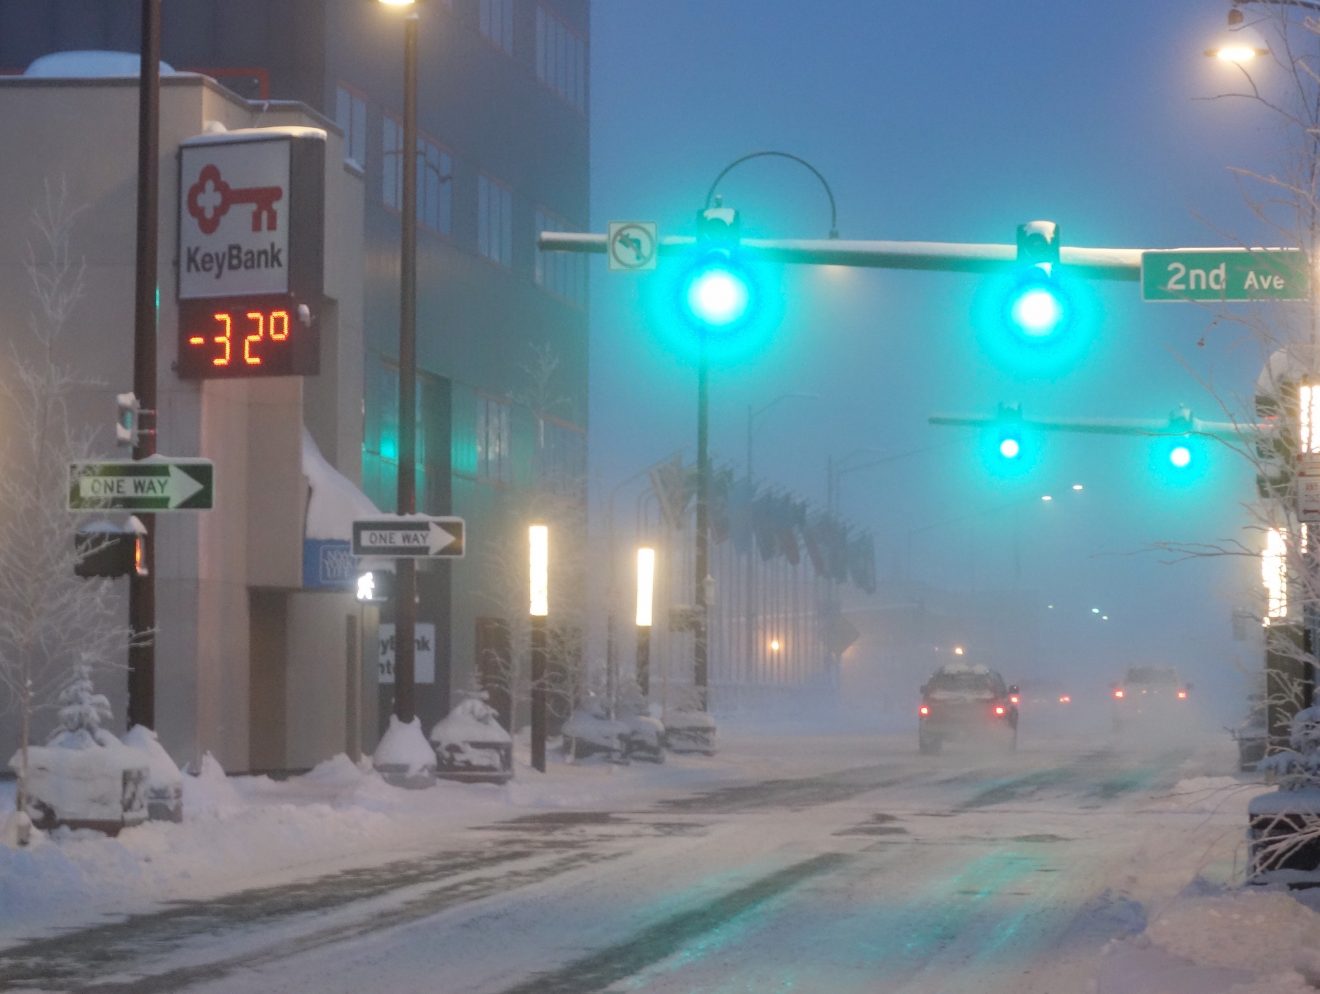 Ice fog obscures a street in Fairbanks where the temperature sign reads -32.